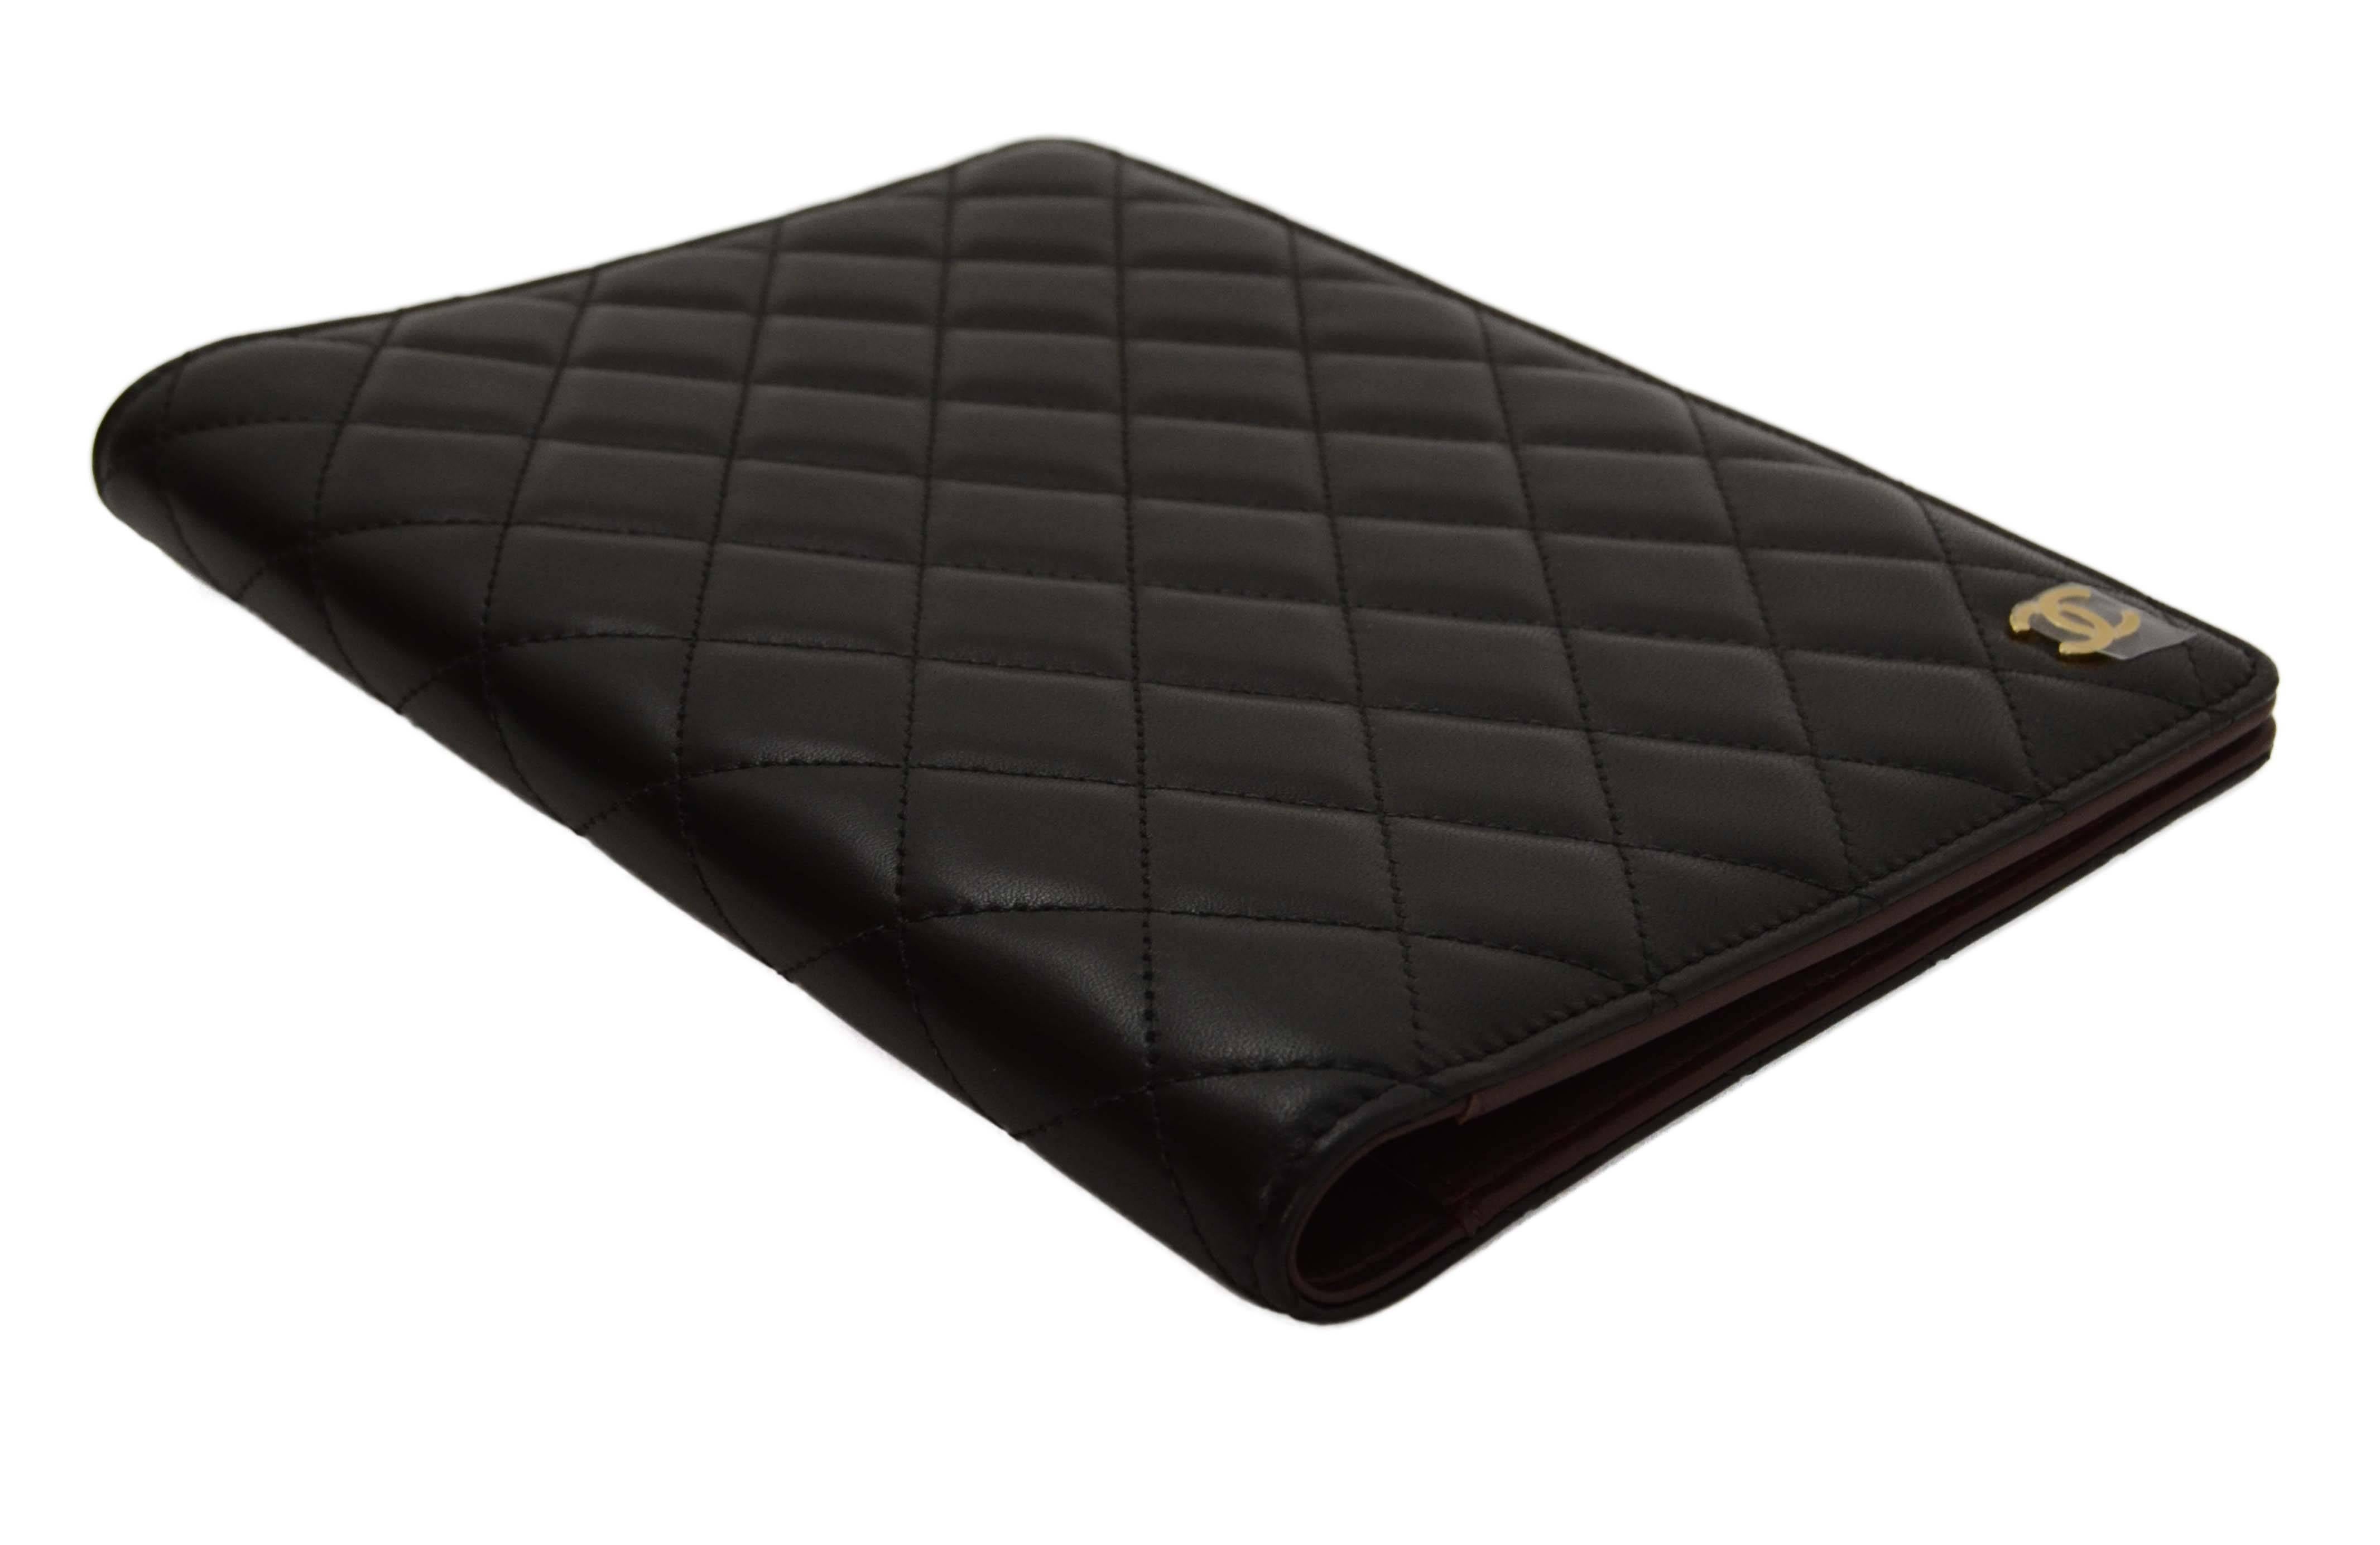 Chanel ’15 Black Quilted Lambskin Agenda Cover
Features small goldtone CC on front bottom corner
Made In: Italy
Year of Production: 2015
Color: Black
Hardware: Goldtone
Materials: Leather
Lining: Burgundy leather
Closure/Opening: Folds